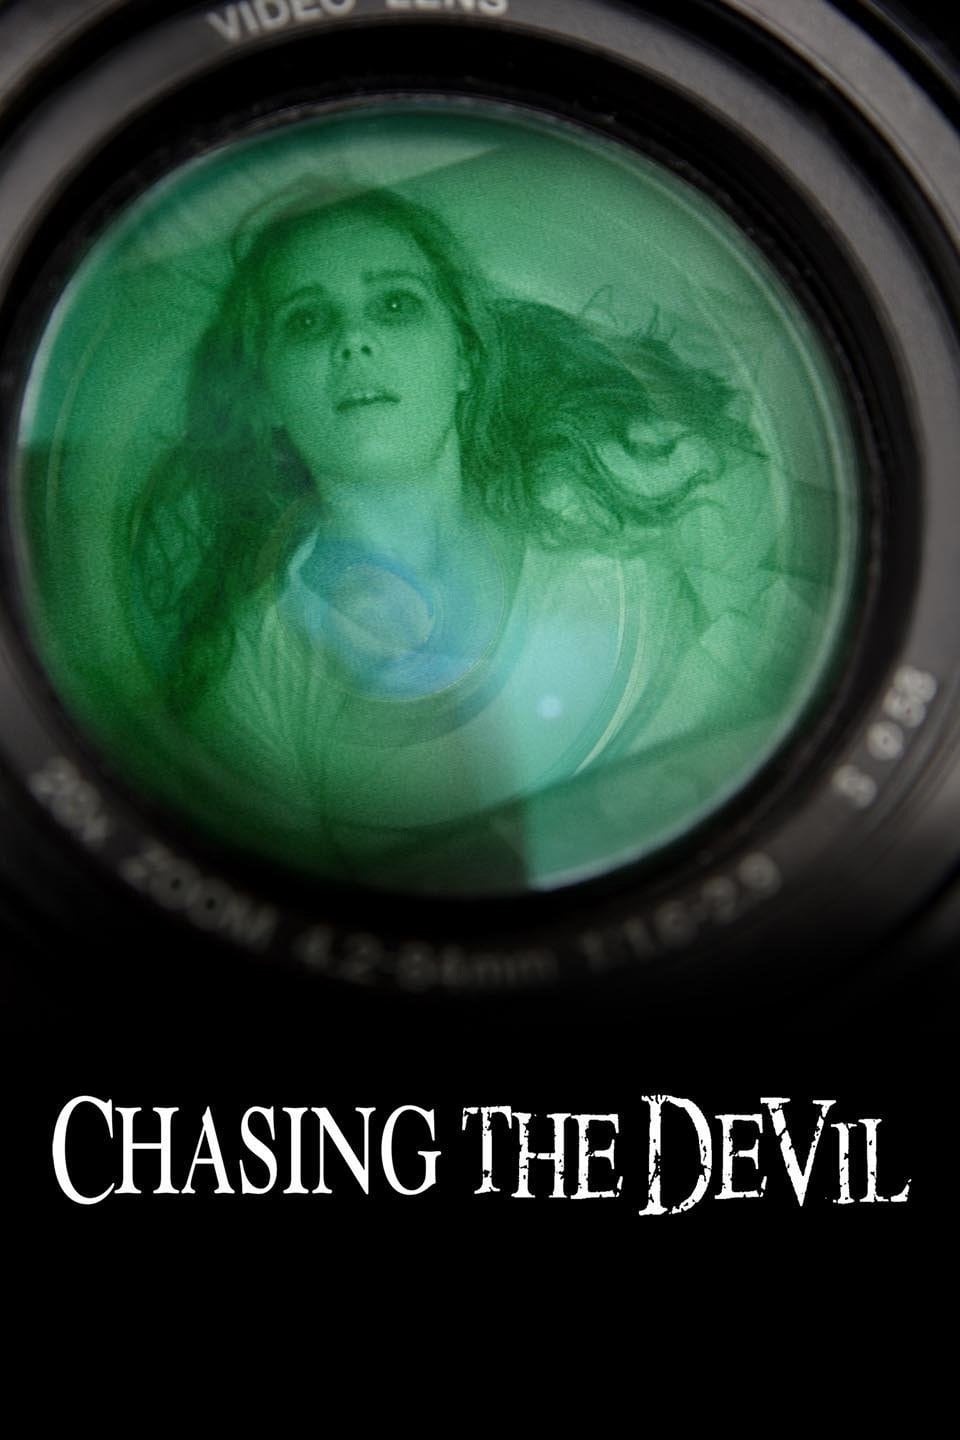 Chasing the Devil (2014) 720p mockumentary/found footage